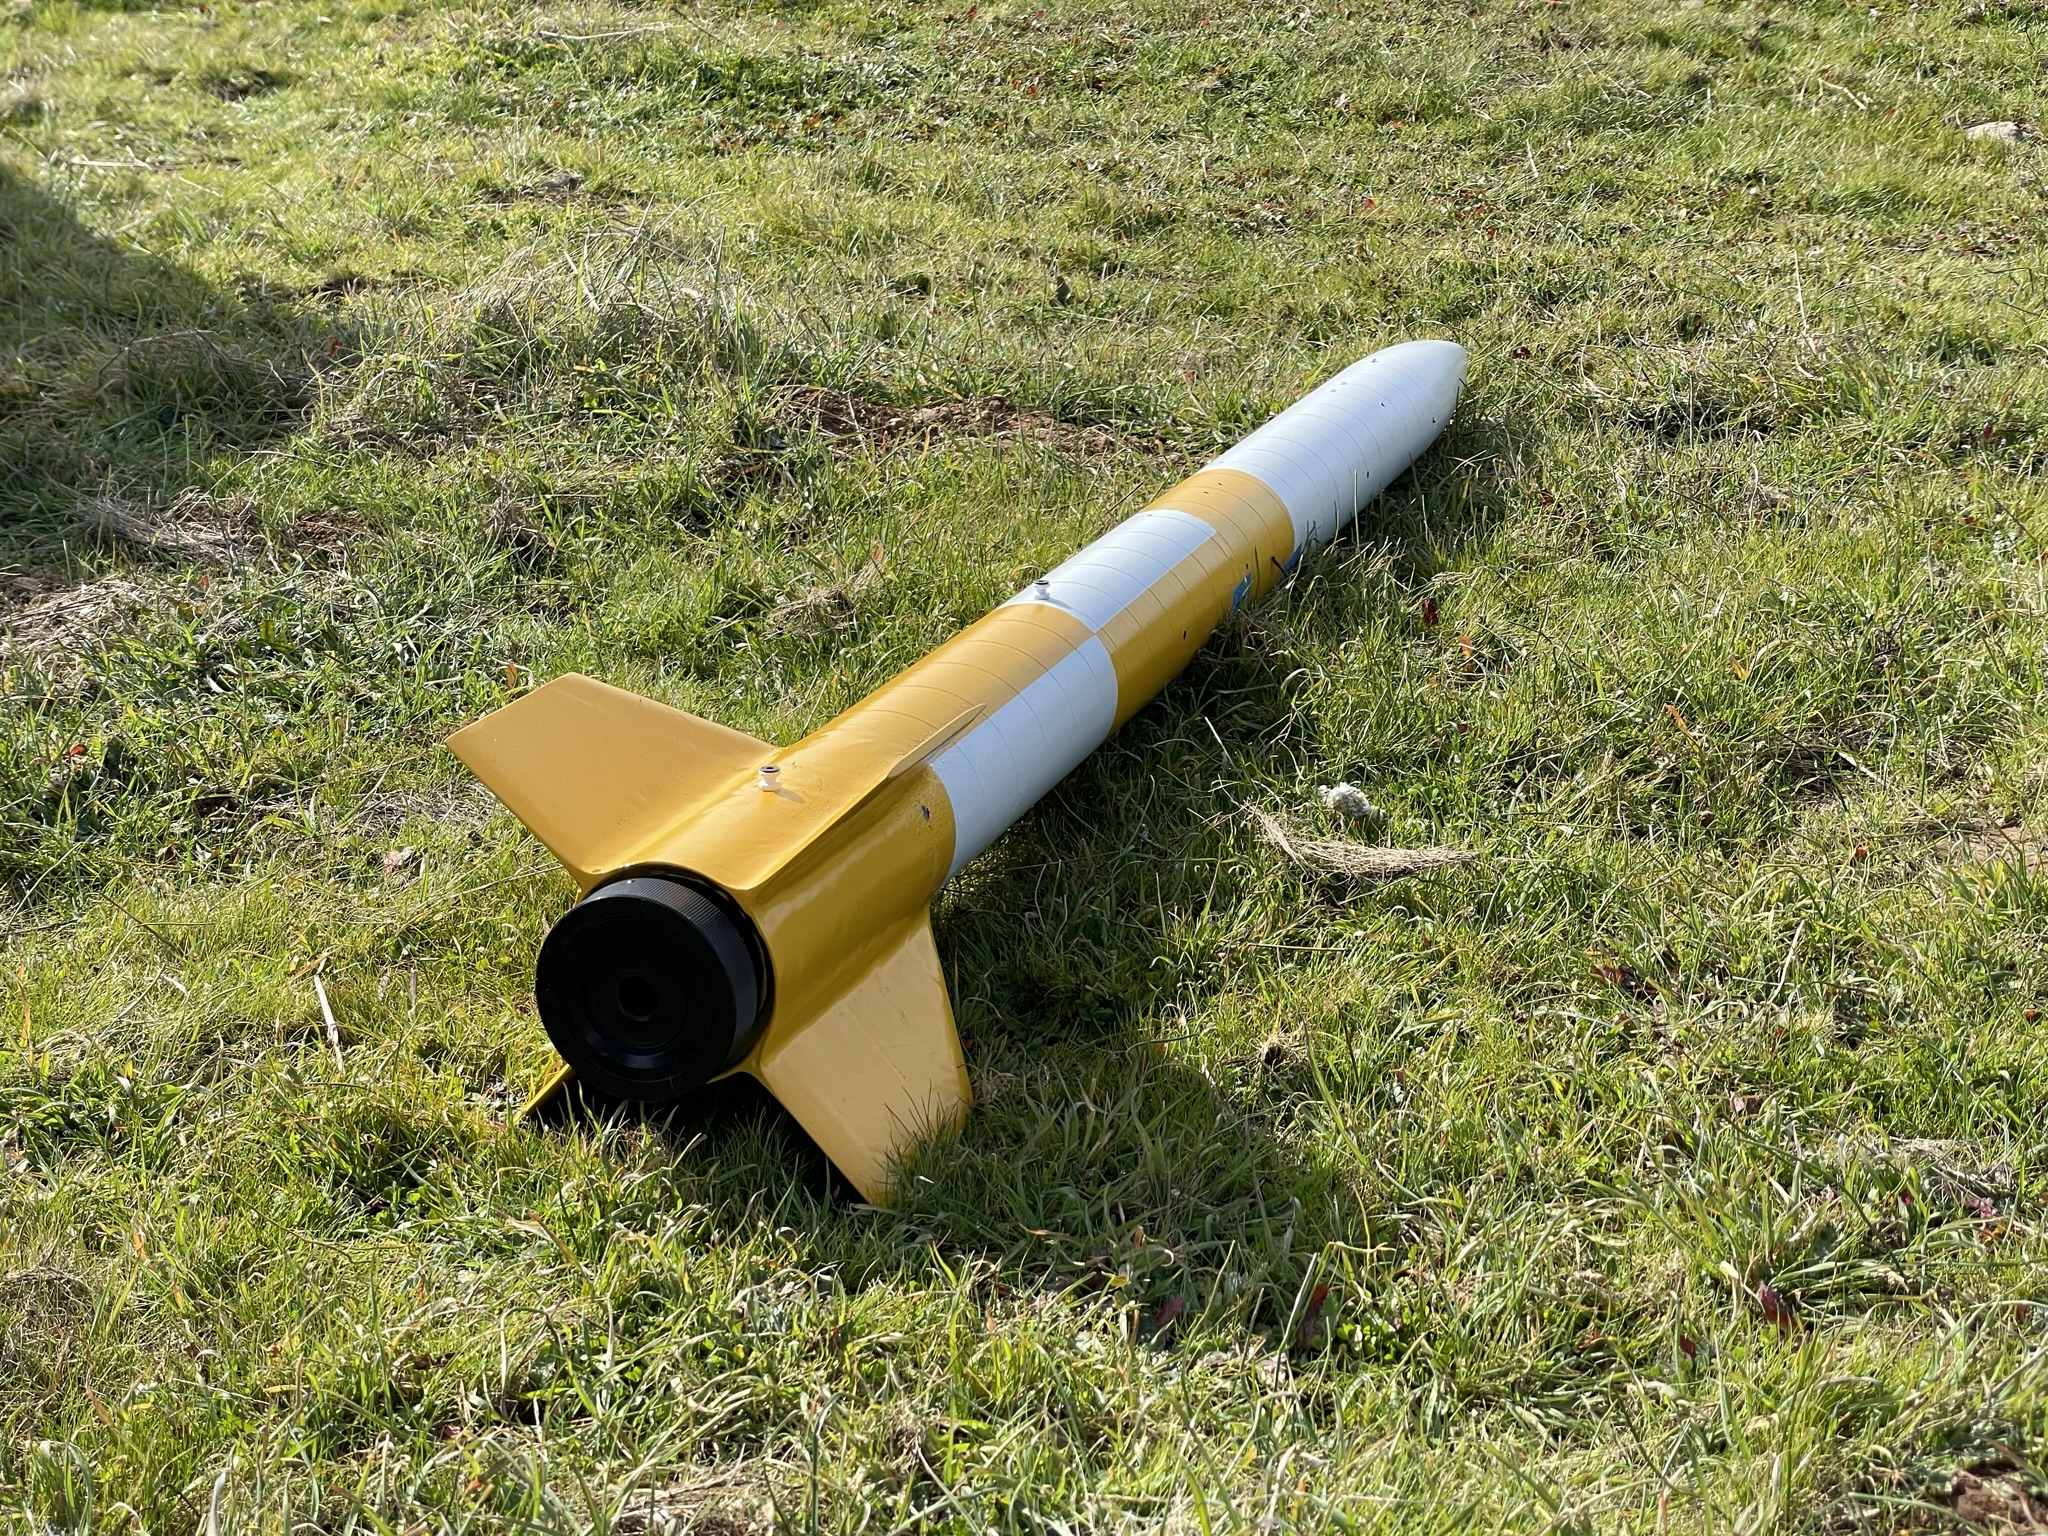 Successful NAR Level 2 certification rocket. Custom BlueTube design with fiberglass nosecone and fins (tip-to-tip layup), flying on a J450-DM motor. Recovery done with a dual-deploy system (72" main, 36" drogue) using two redundant Eggtimer Quark altimeters.